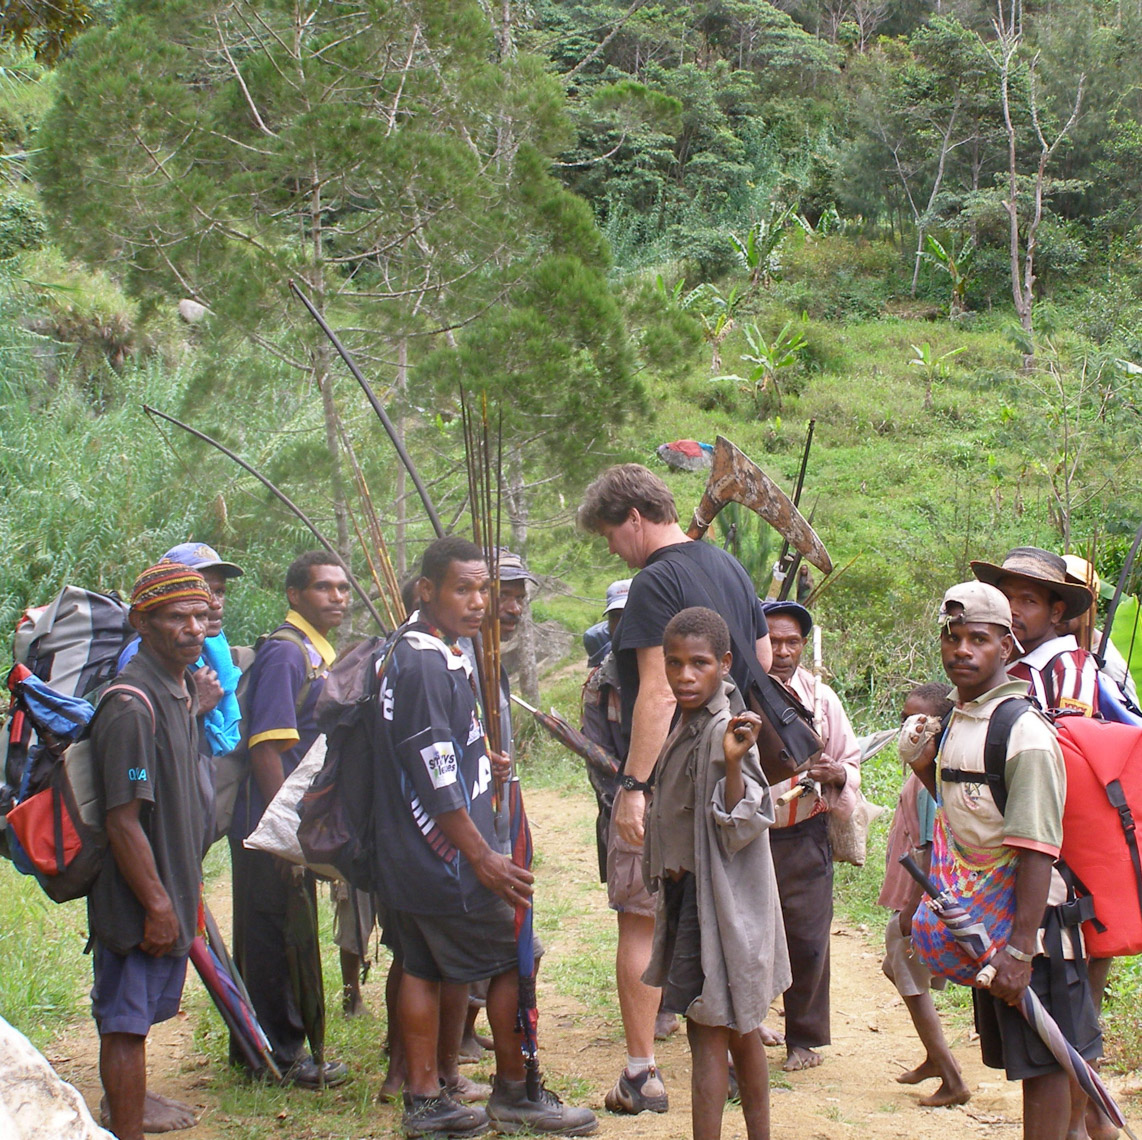 In the Kukukuku area, interesting region at the border of Eastern Highlands, Morobe and Gulf Provinces.  Looks like we are heading out of a village ready for the next.  I am holding quite a nice painting war club.  The bow and arrows the other men are holding are for protection and hunting while on the trail—not things I purchased—circa 2006/7.